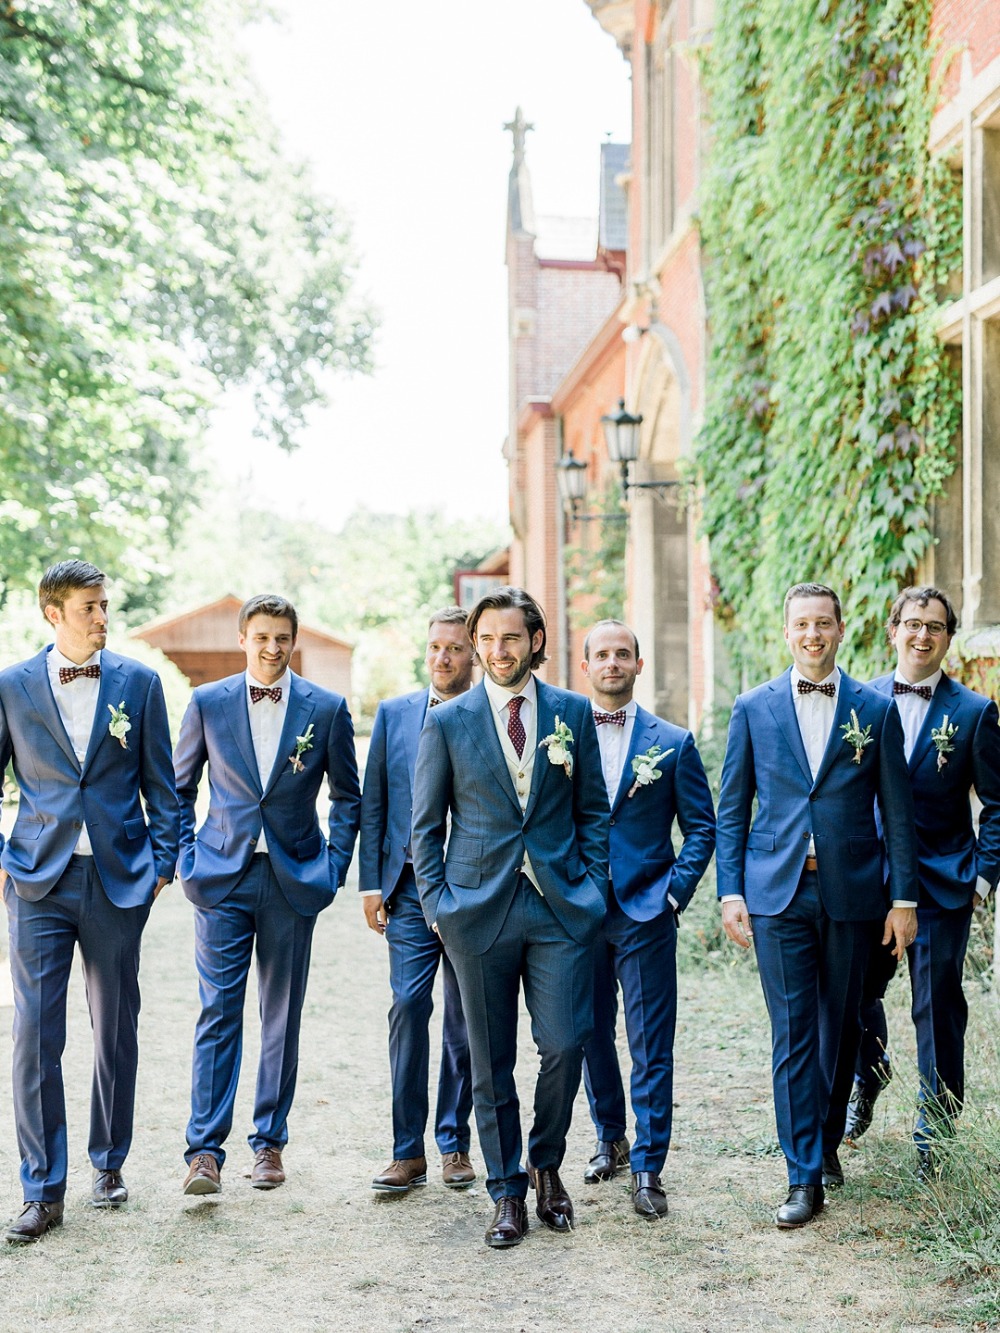 Navy blue suits for the groom and his men